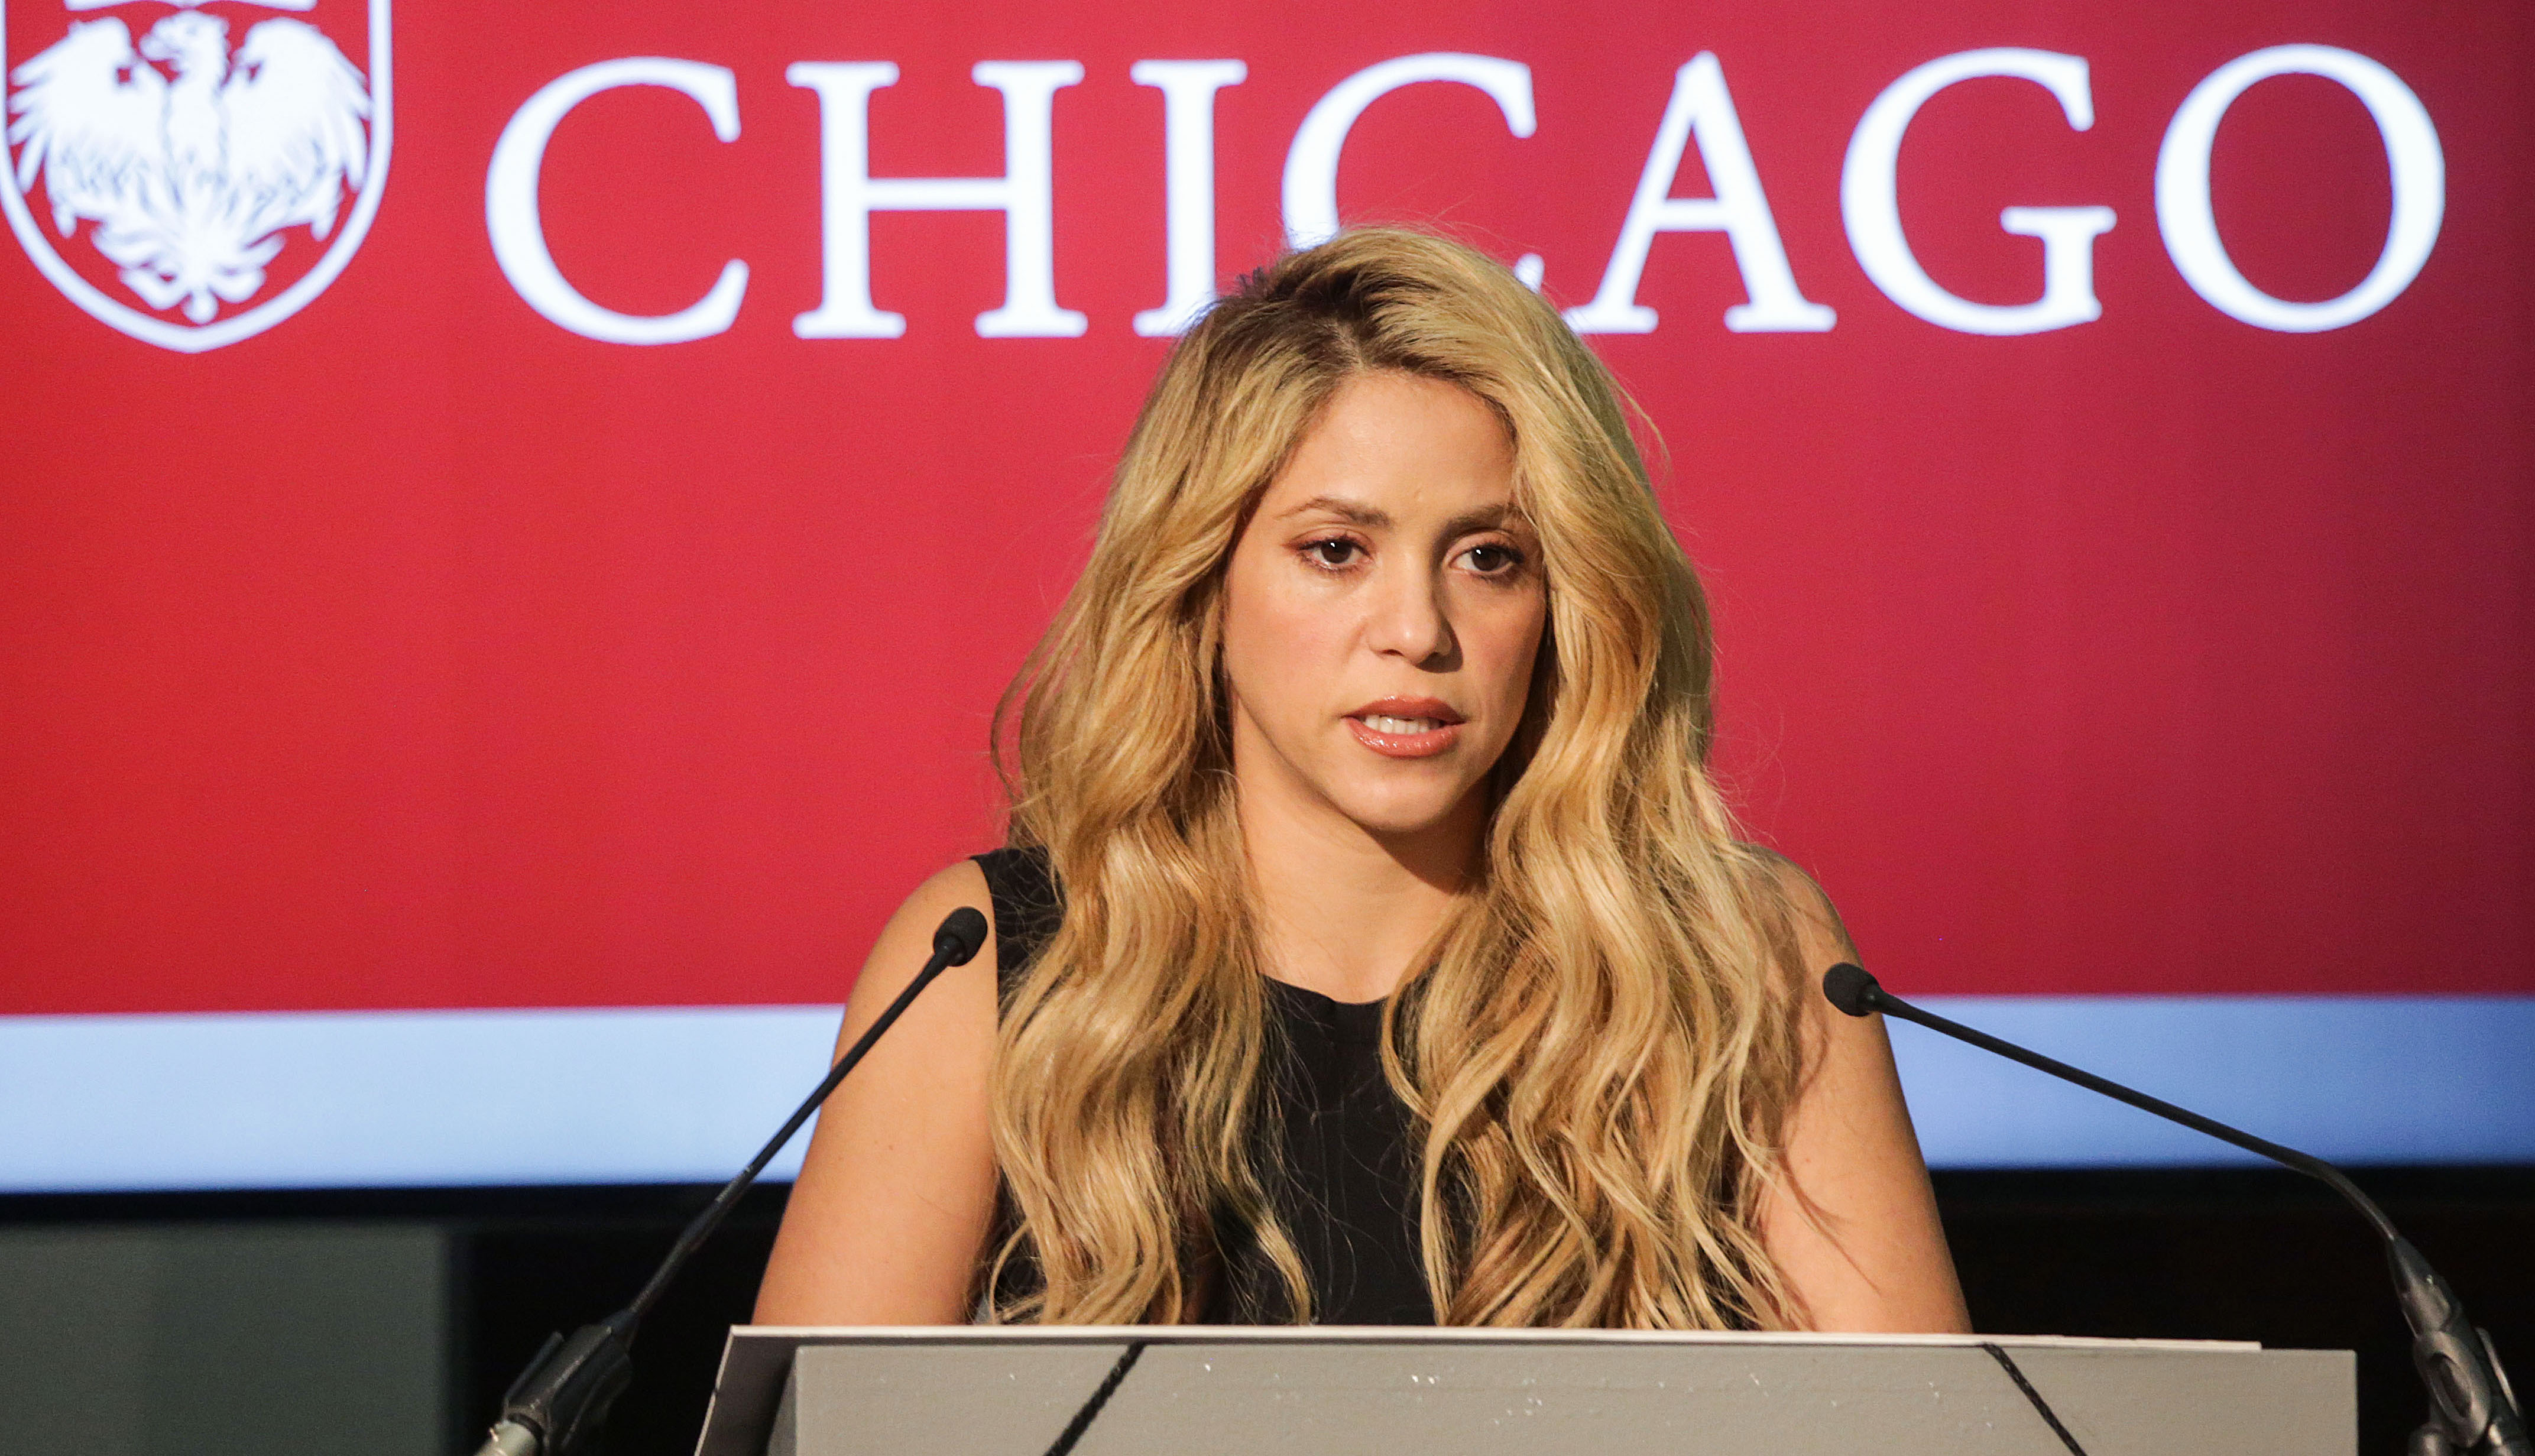 Shakira speaking at conference.